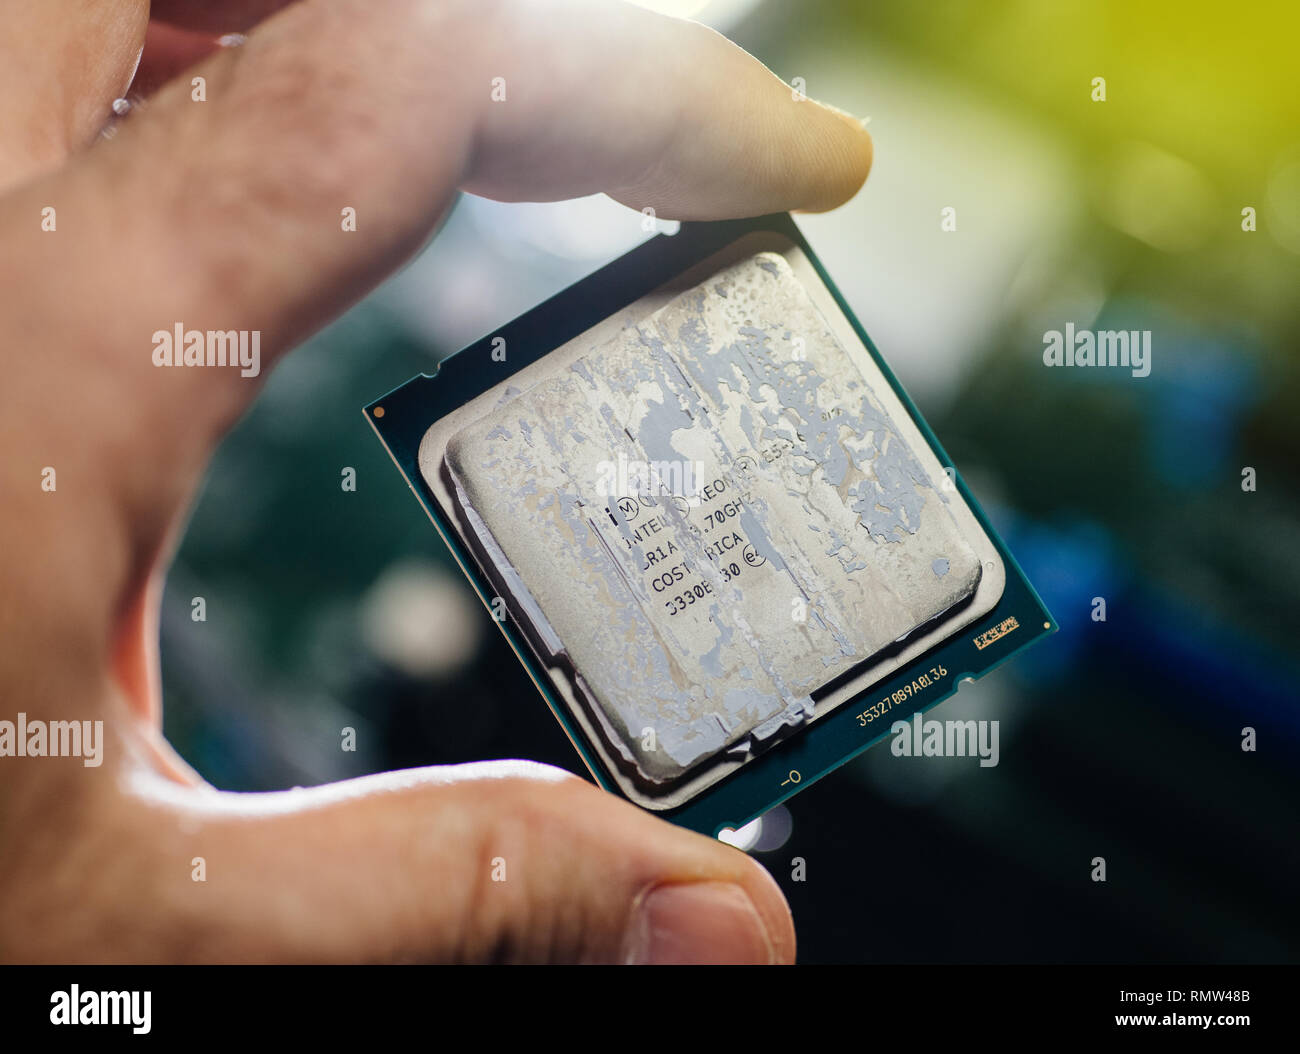 London, United Kingdom - Feb 5, 2019: Man hand IT engineer holding against technological motherboard background new Intel Xeon professional CPU processor Broadwell FCLGA2011-3 Stock Photo